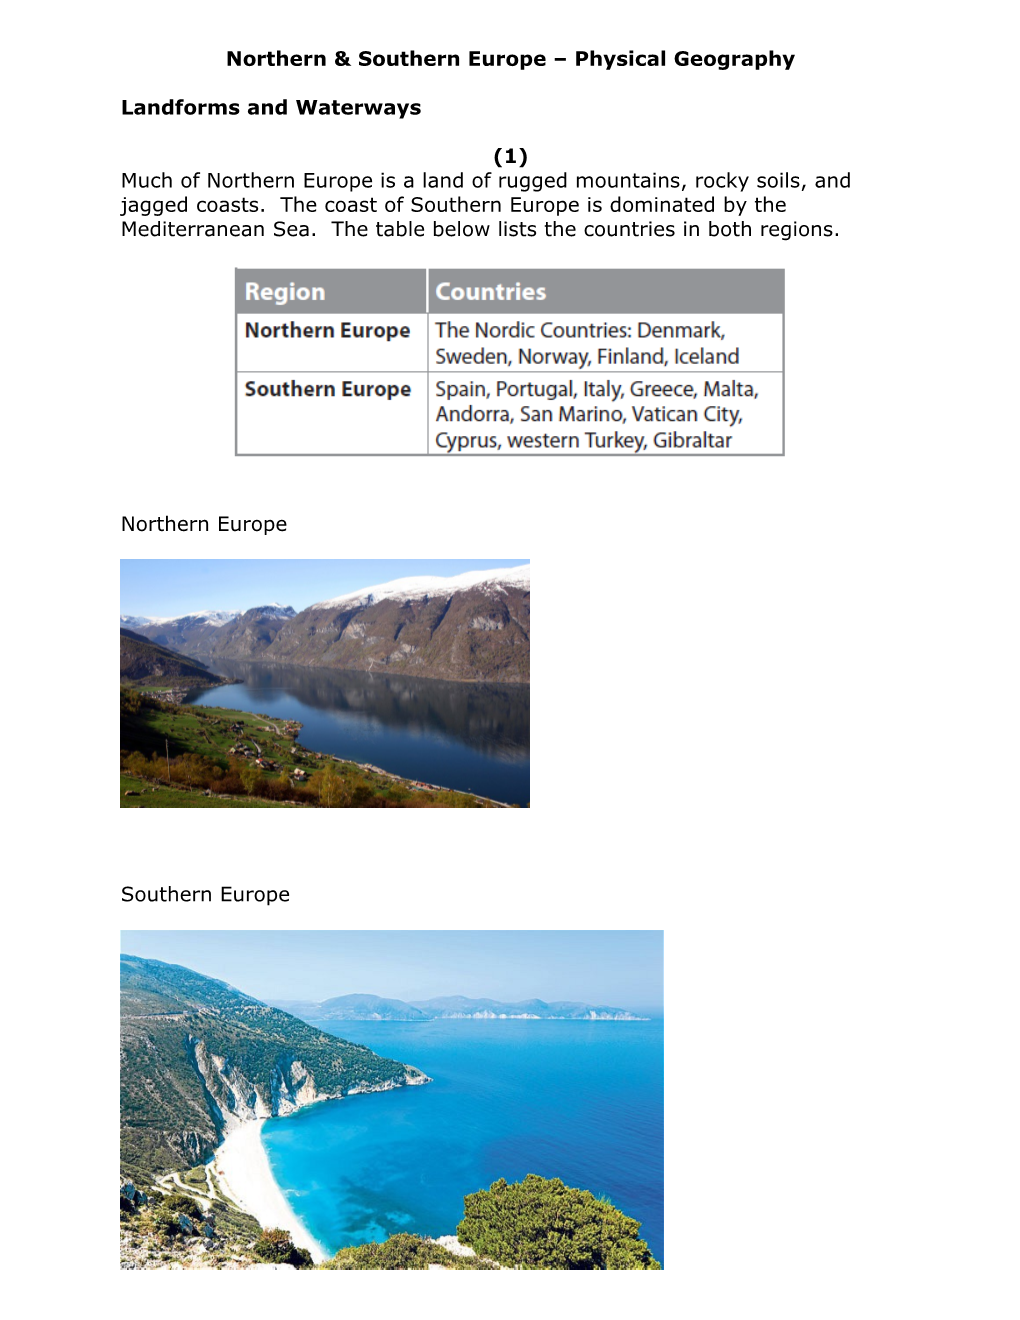 Northern & Southern Europe Physical Geography